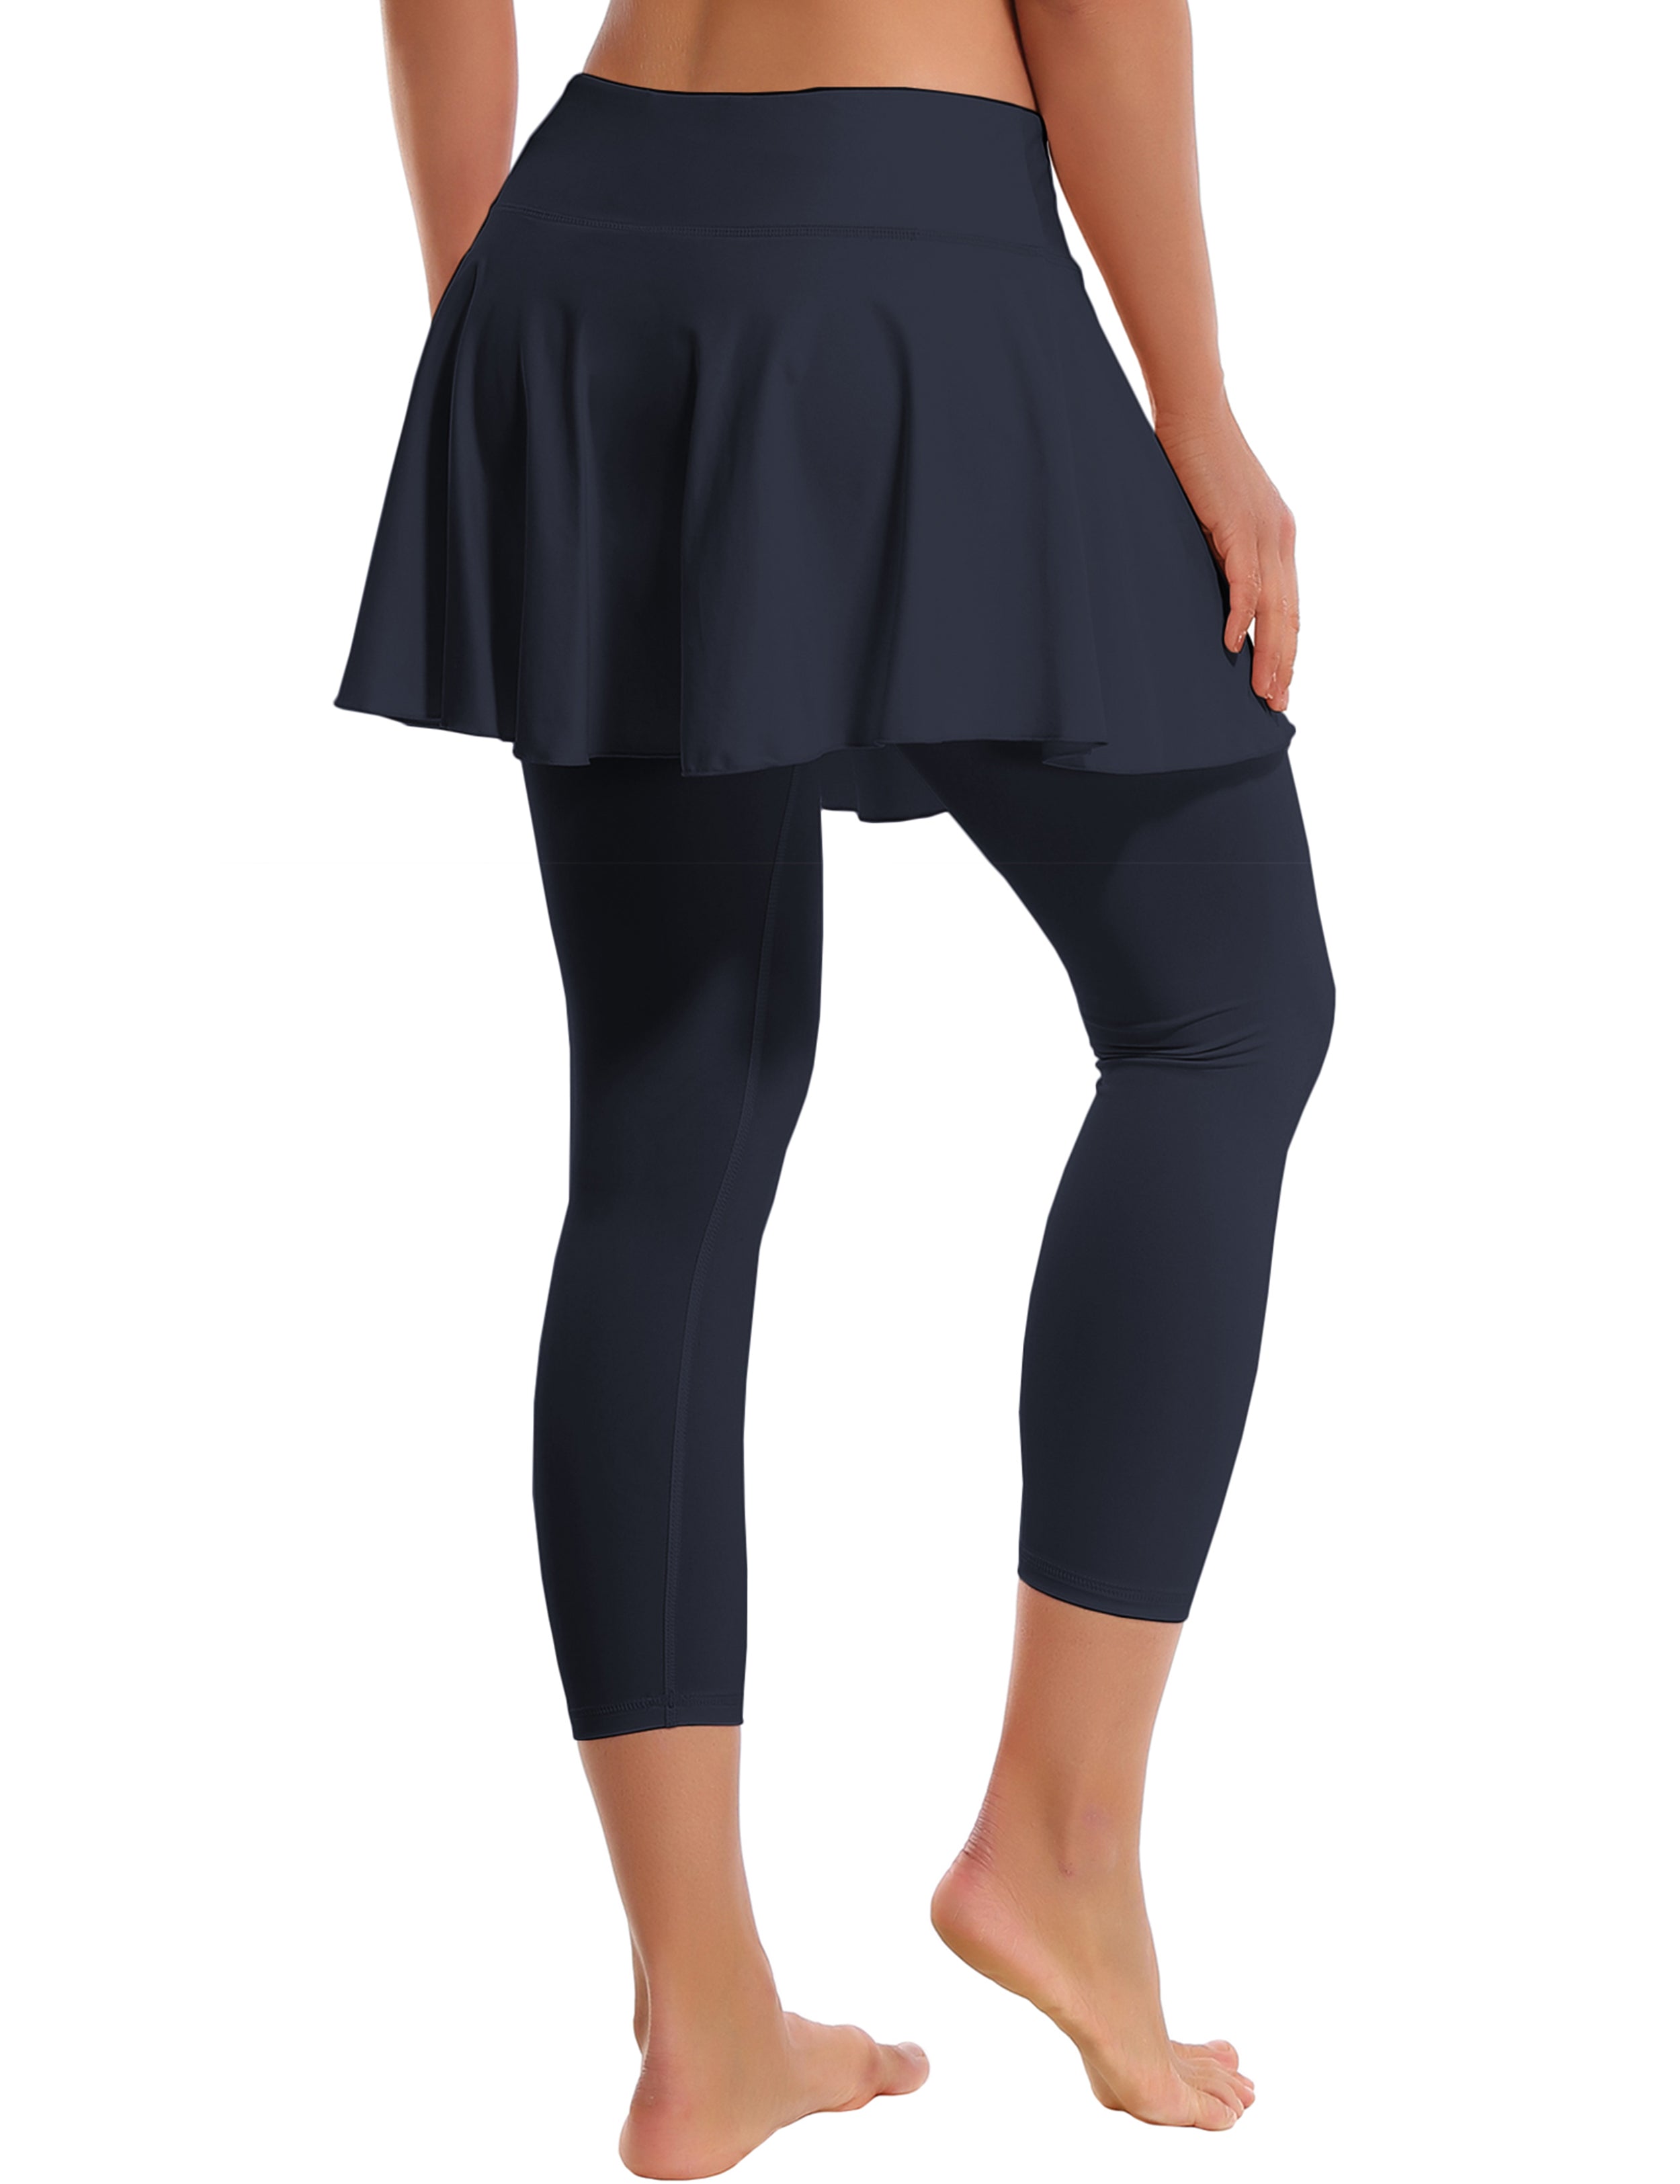 19" Capris Tennis Golf Skirted Leggings with Pockets darknavy 80%Nylon/20%Spandex UPF 50+ sun protection Elastic closure Lightweight, Wrinkle Moisture wicking Quick drying Secure & comfortable two layer Hidden pocket